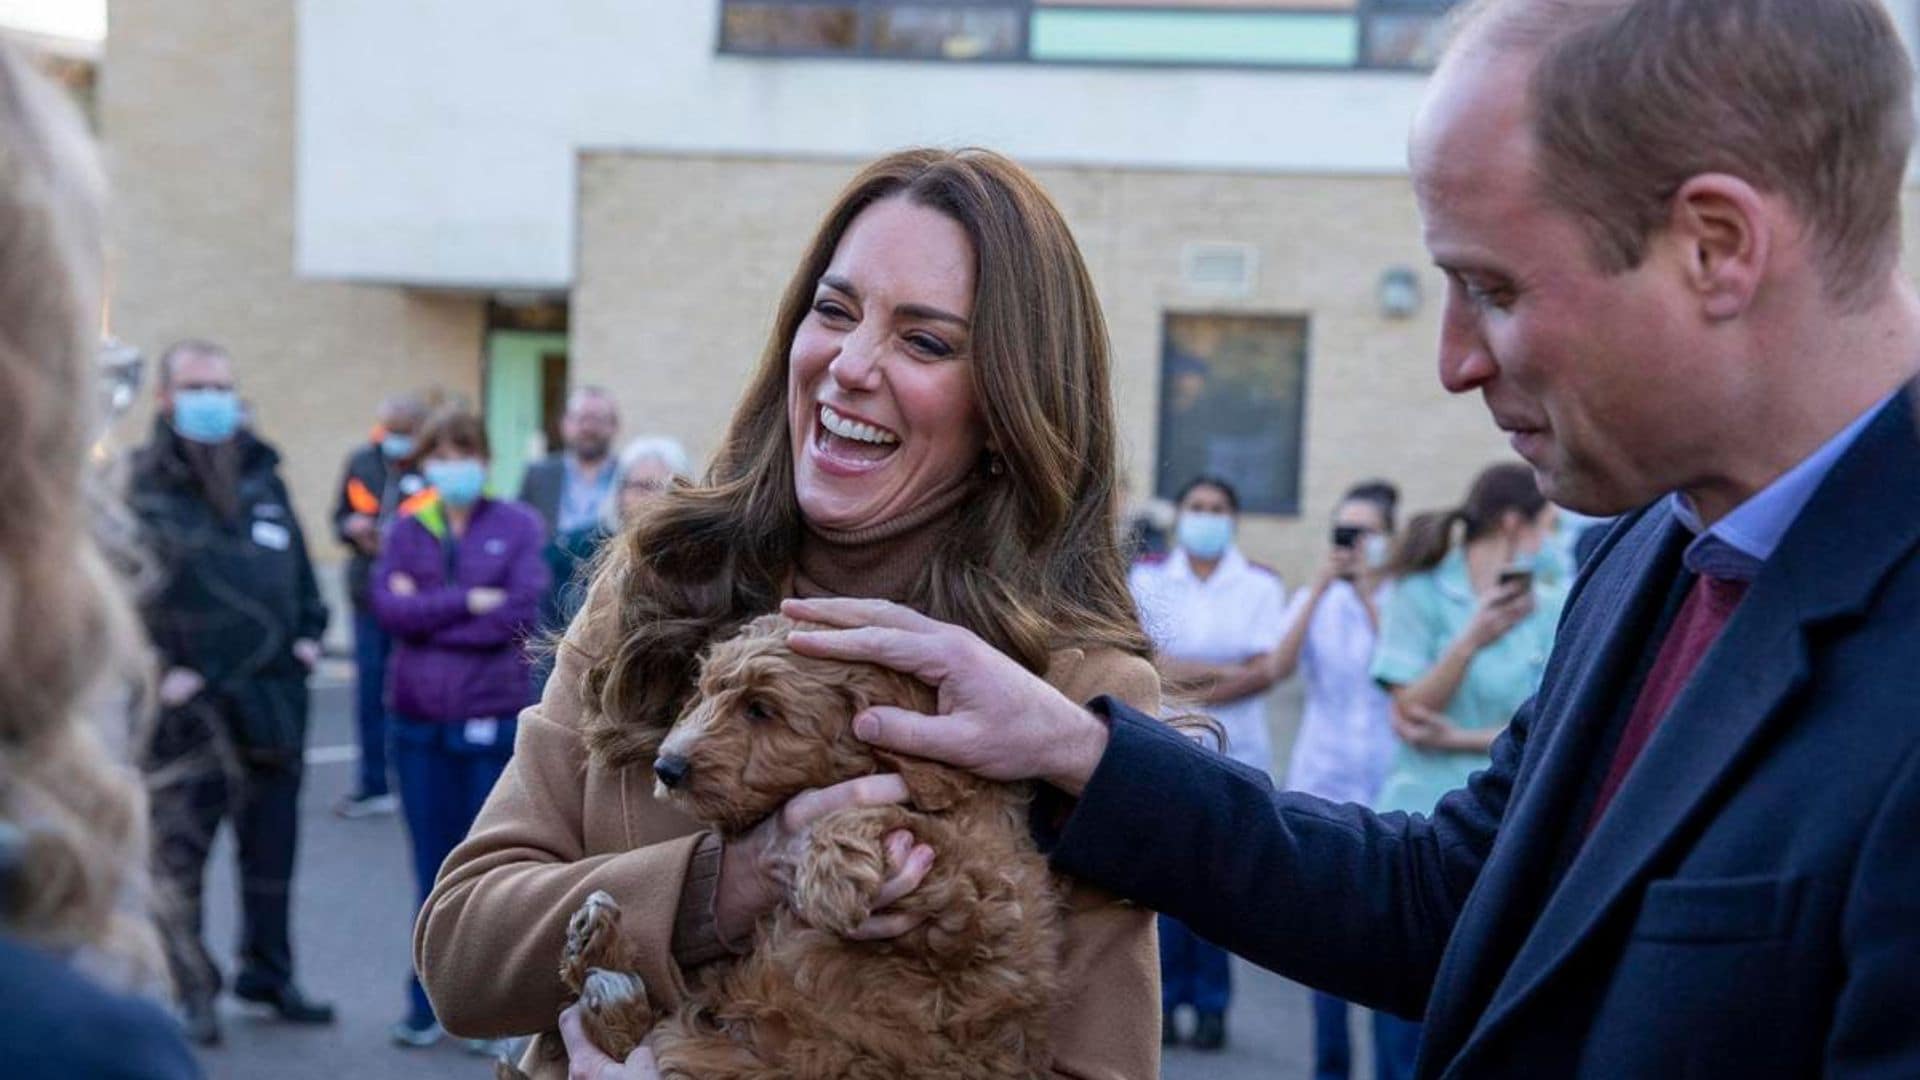 These photos of Prince William and Kate cuddling a puppy will bring a smile to your face